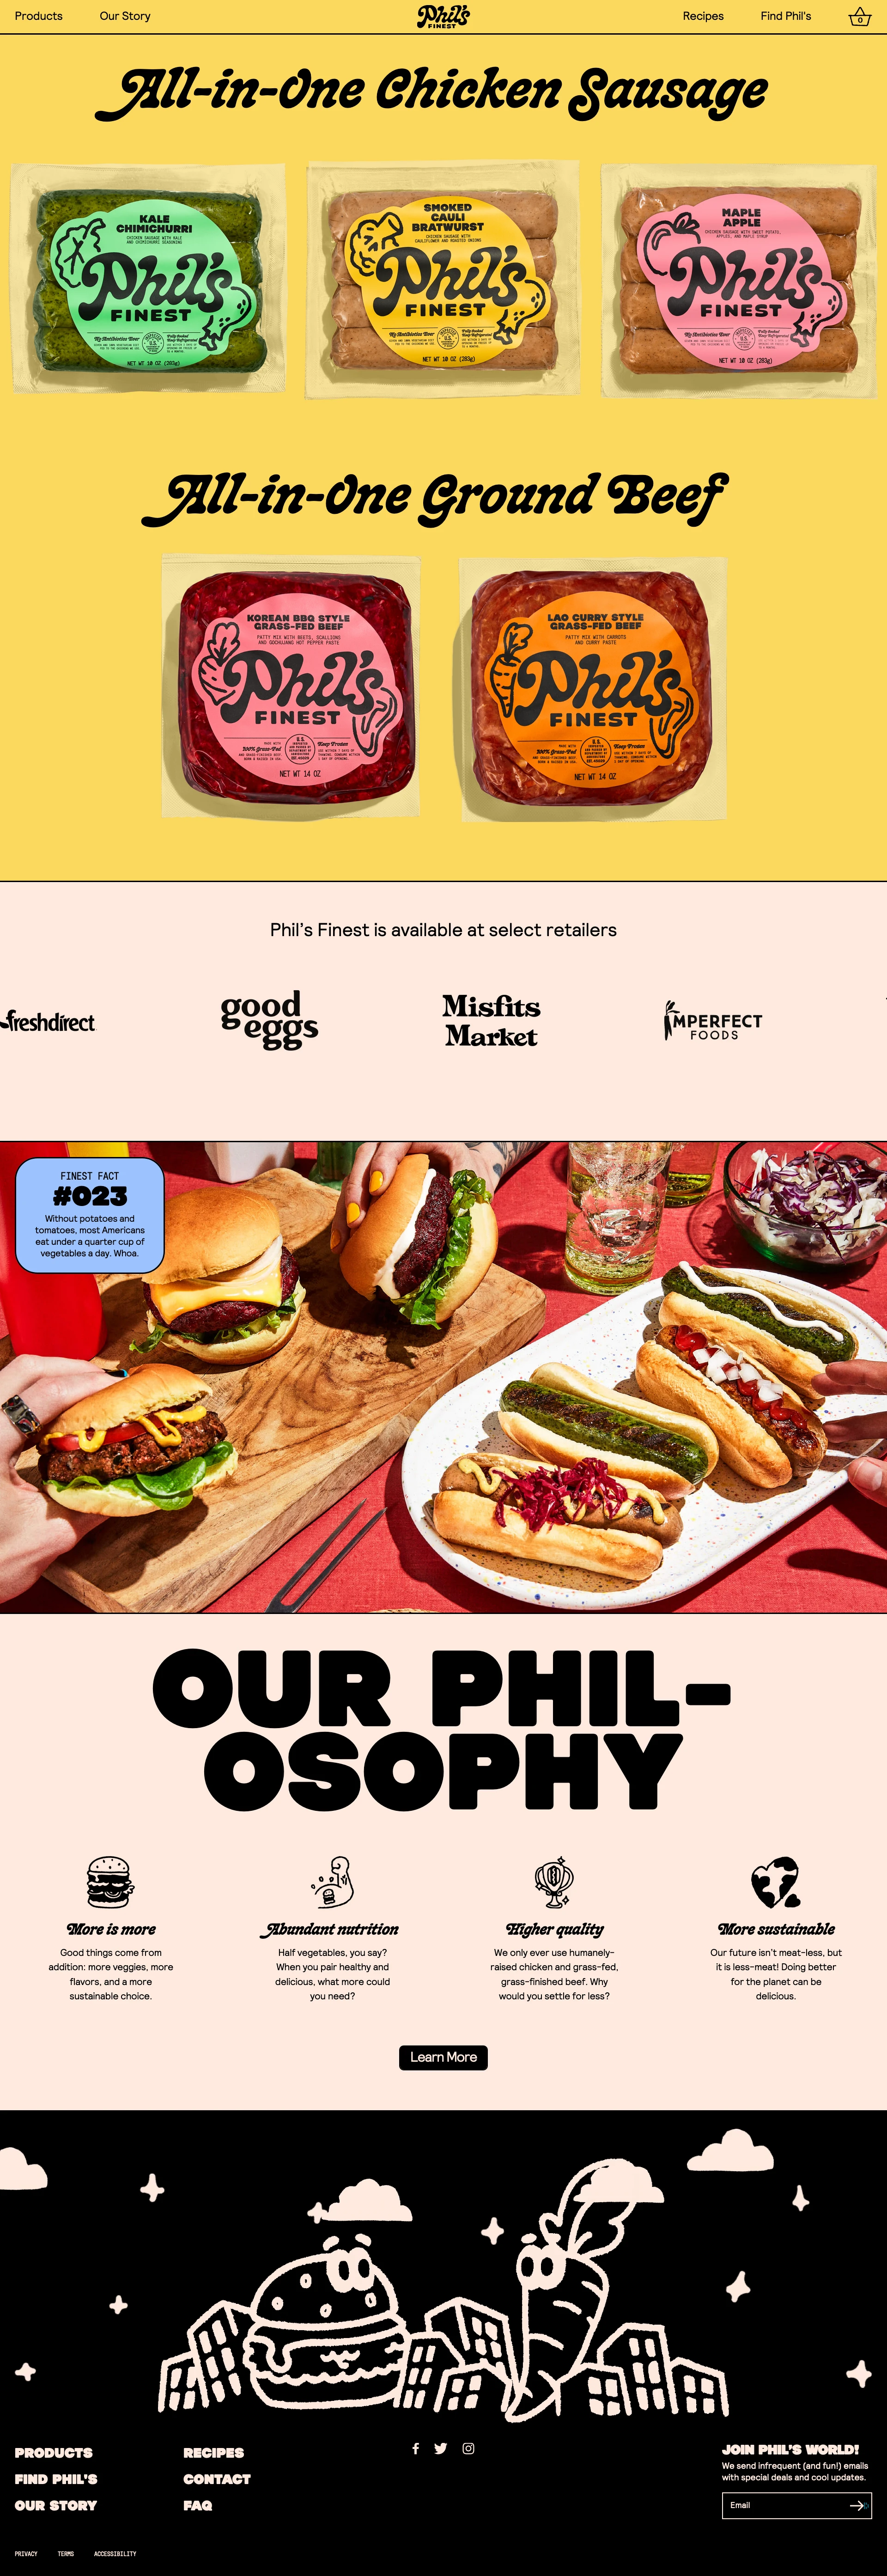 Phil's Finest Landing Page Example: We believe there’s room for both meat and vegetables on our plates—and when you unite them with mouthwatering spices, delicious things happen! You might have known us as Misfit Foods, but now you can call us Phil’s Finest. Welcome!